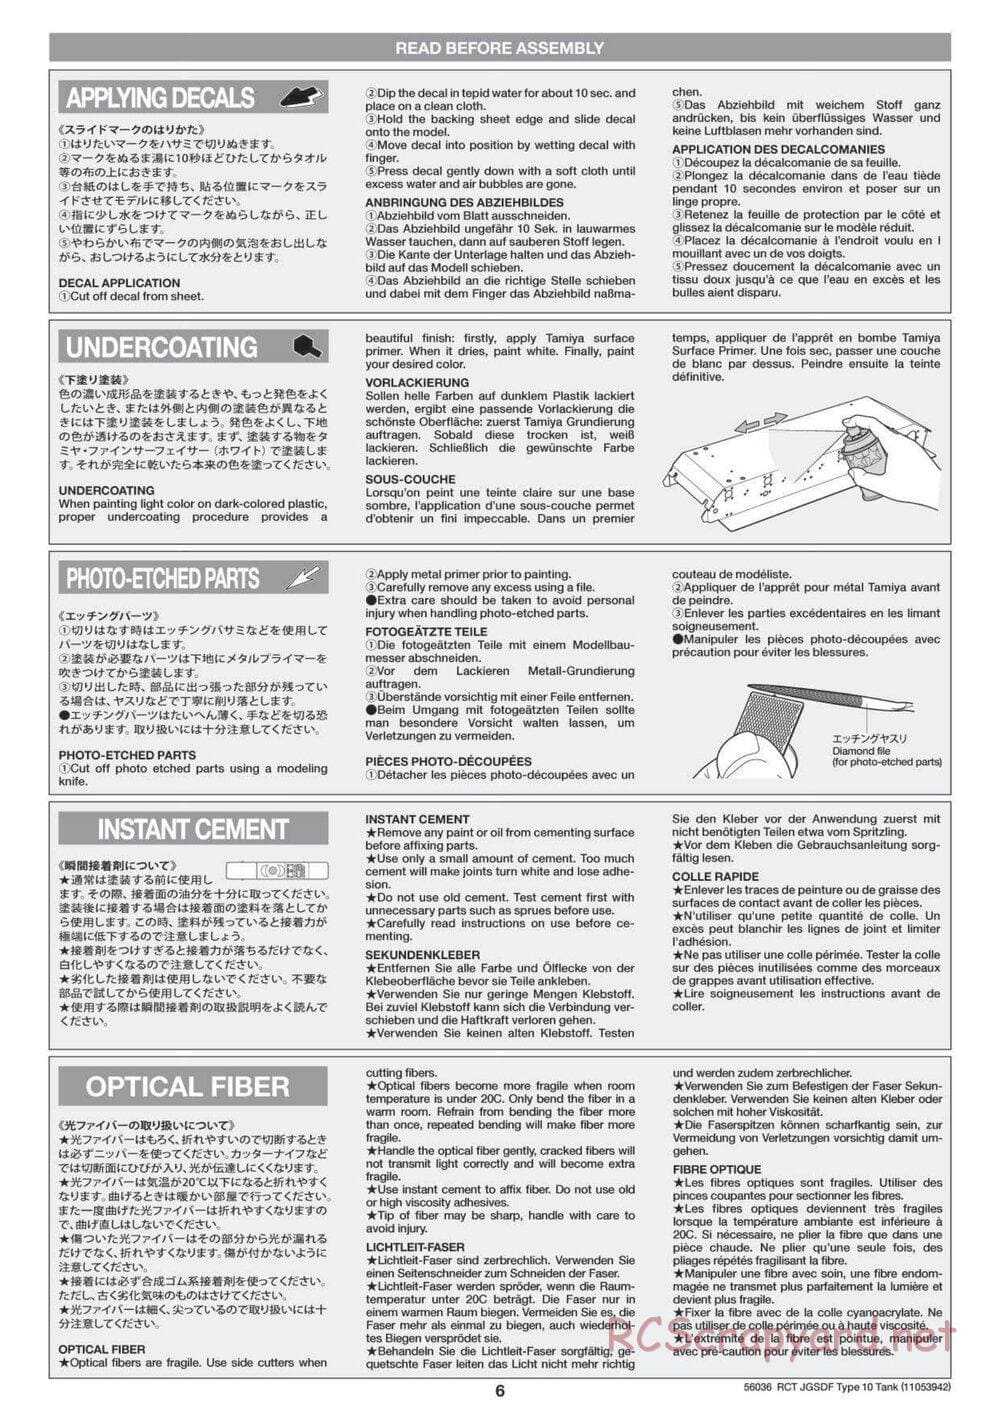 Tamiya - JGSDF Type 10 Tank - 1/16 Scale Chassis - Manual - Page 6